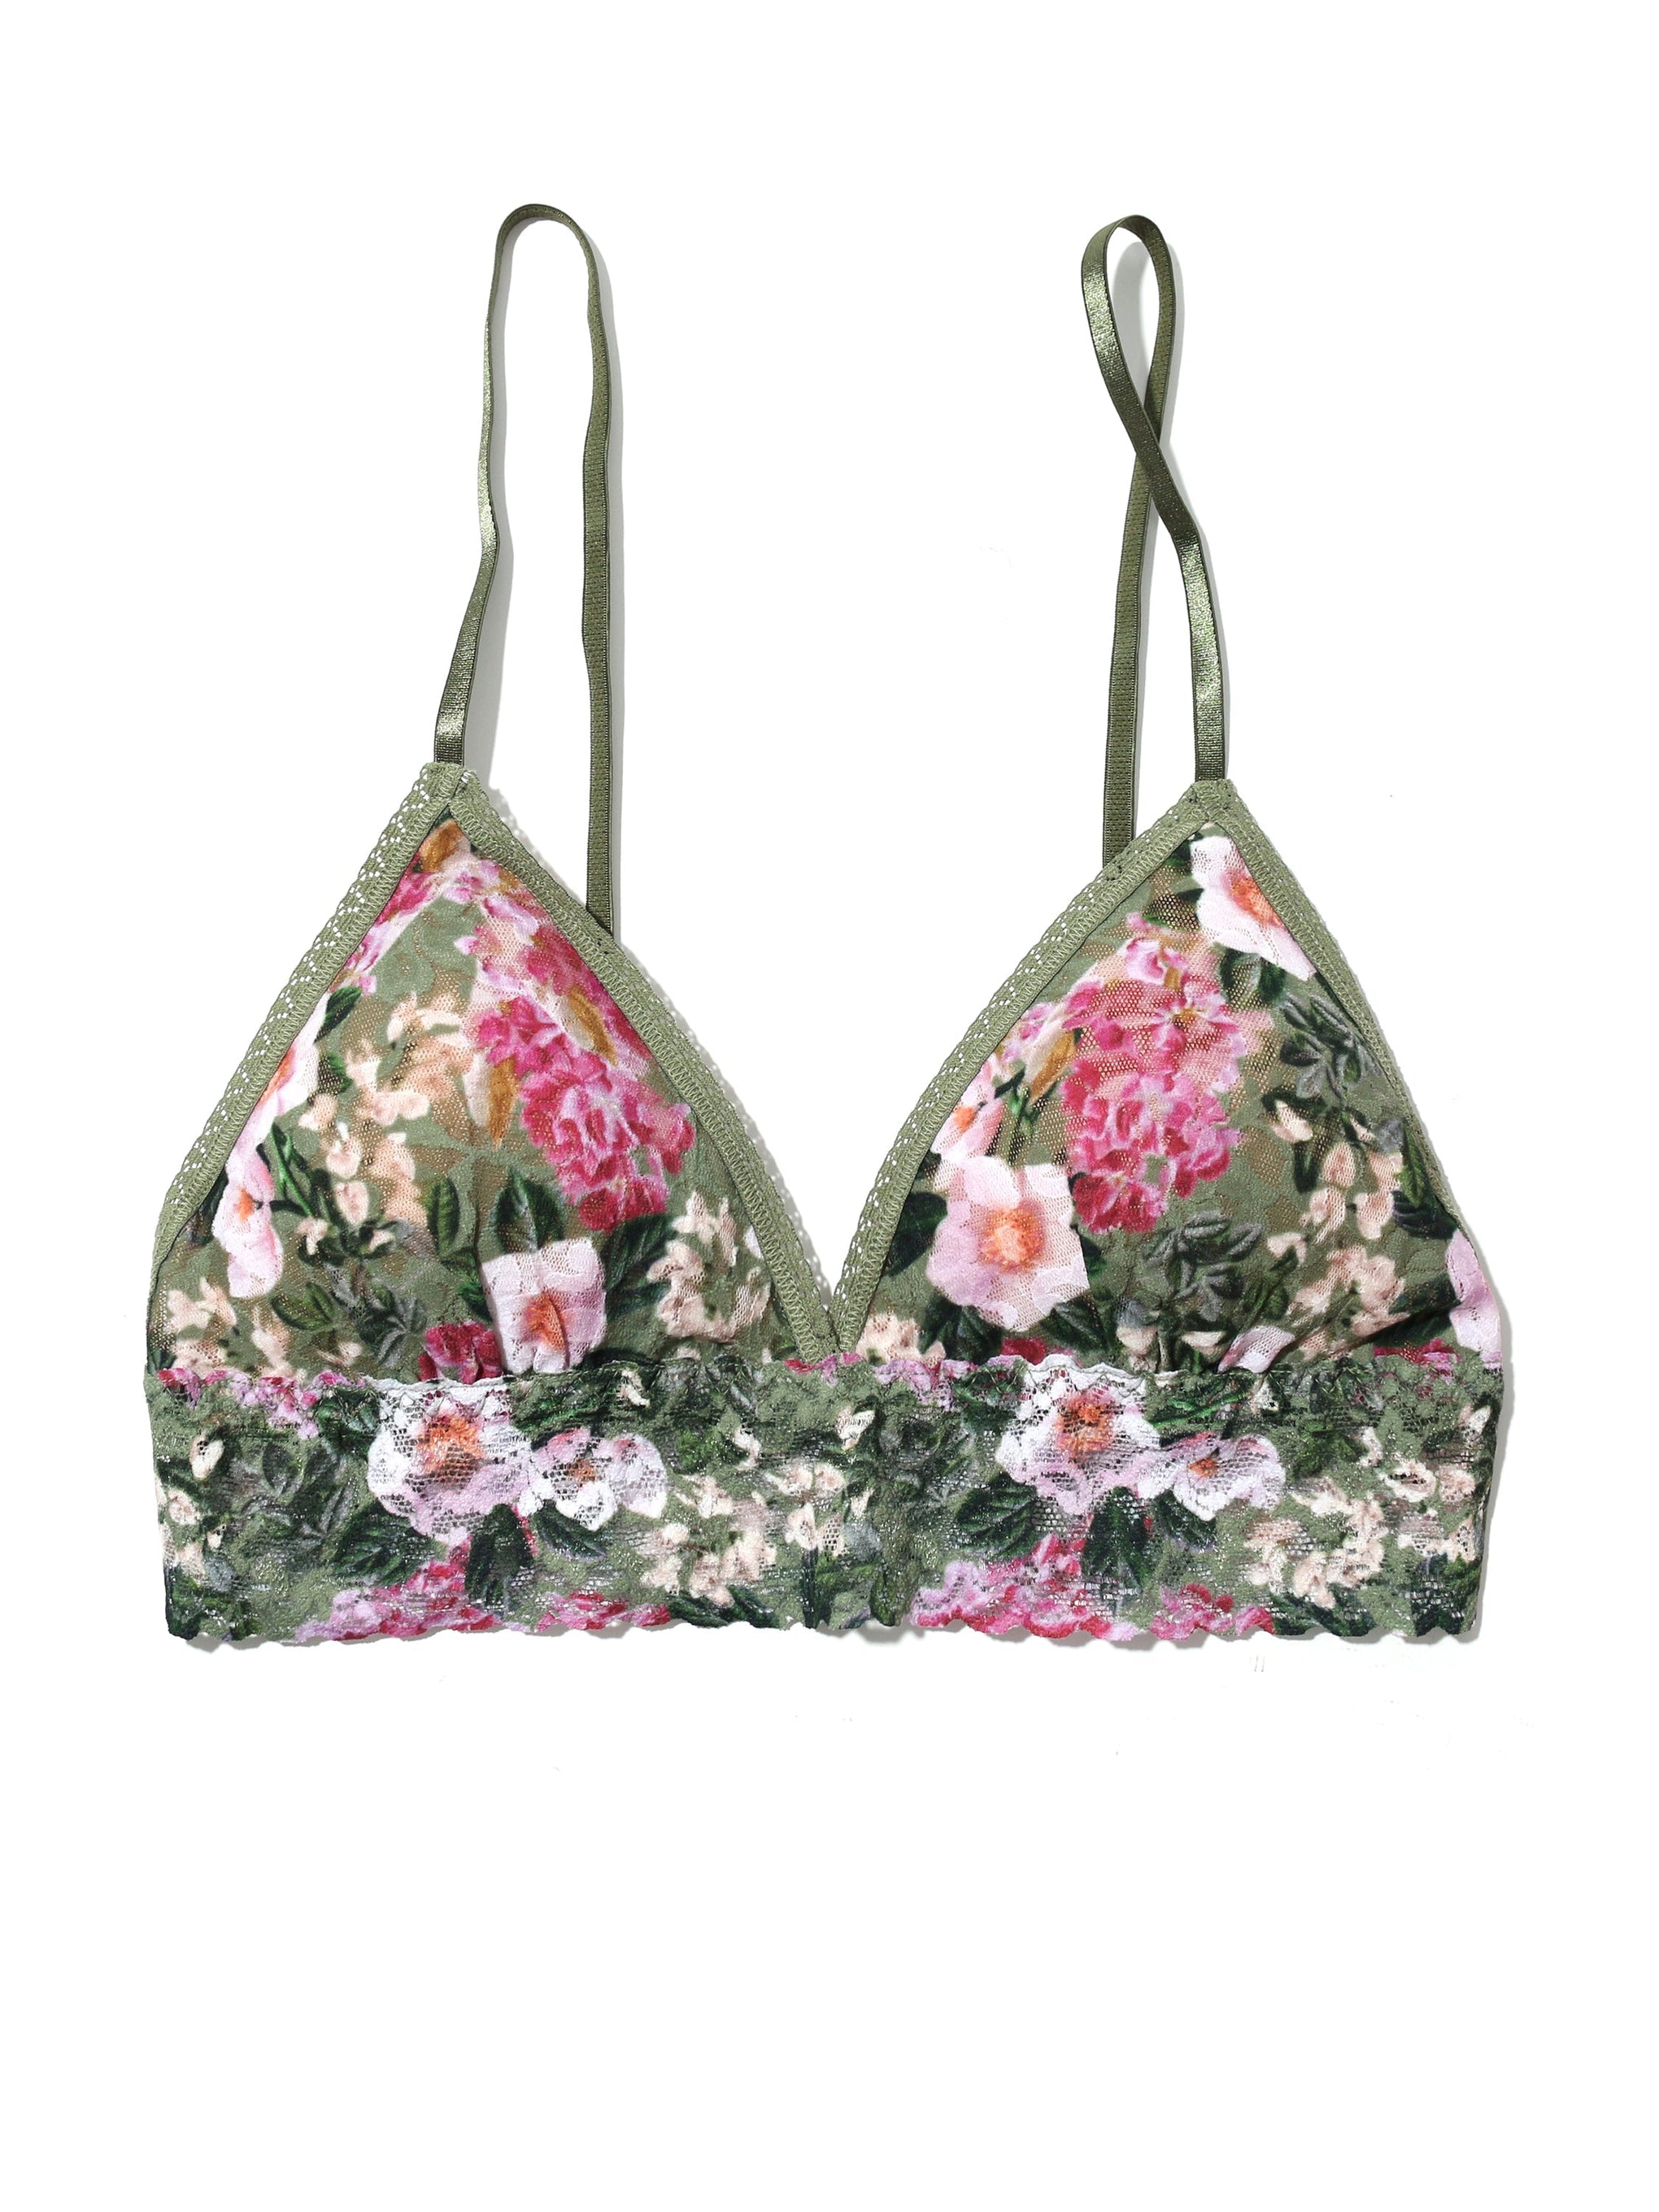 Women's Padded Midi Lace Bralette - Padded - Floral Lace Design With Criss  Cross Pattern - Adjustable Straps - 6 Bralettes Per Pack - Sizes: 3-S/M and  3-M/L - 92% Nylon / 8% Spandex, 7313754